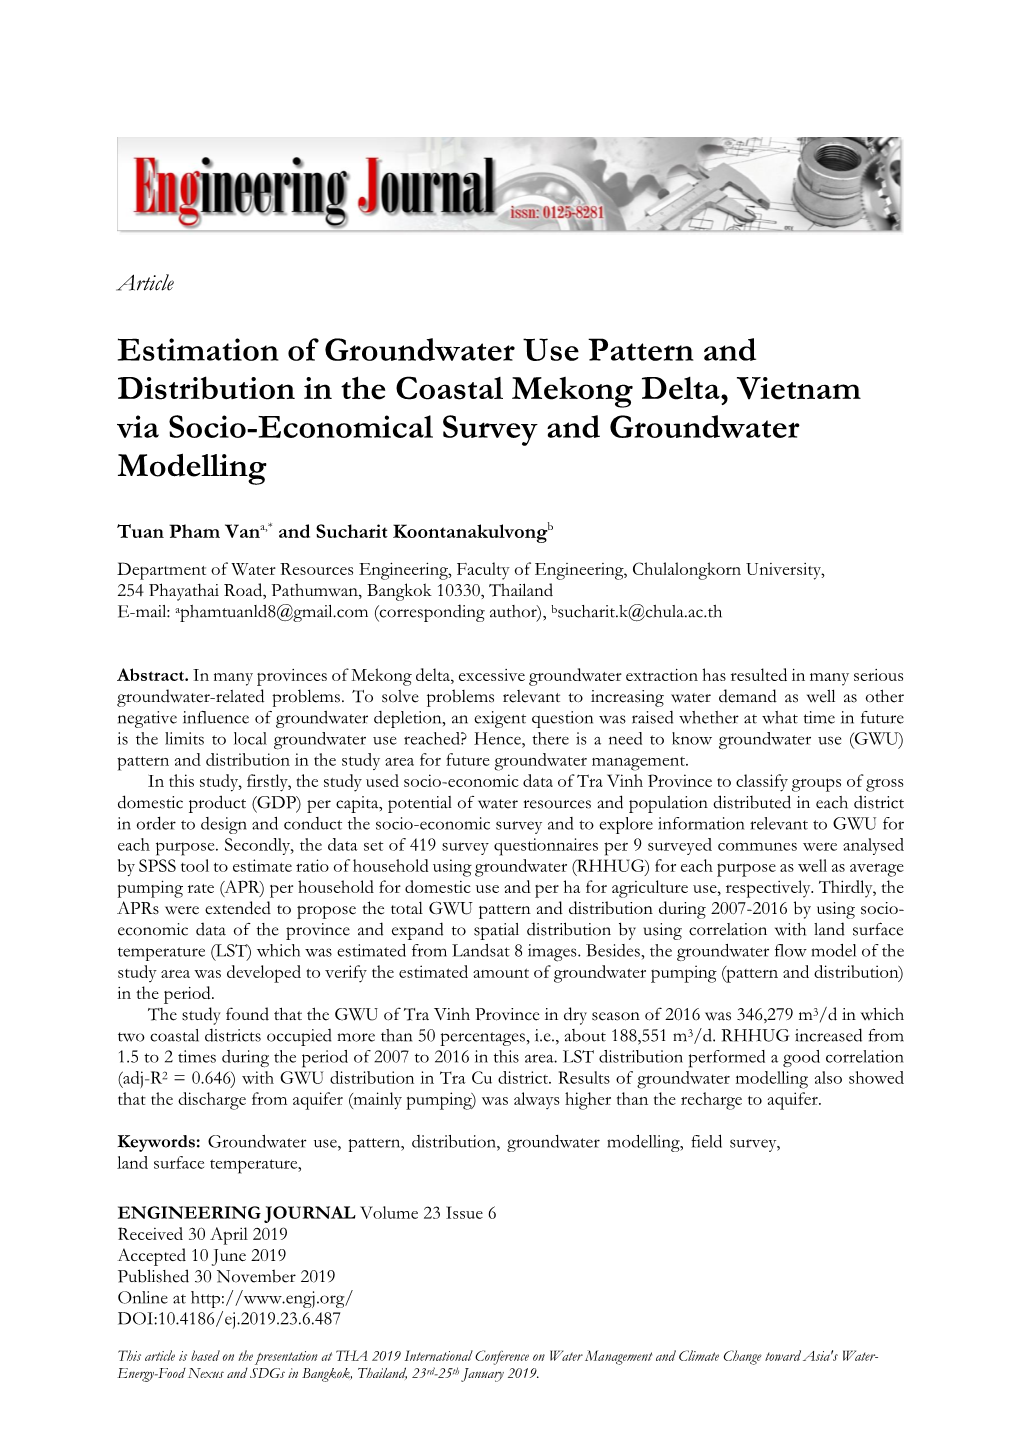 Estimation of Groundwater Use Pattern and Distribution in the Coastal Mekong Delta, Vietnam Via Socio-Economical Survey and Groundwater Modelling